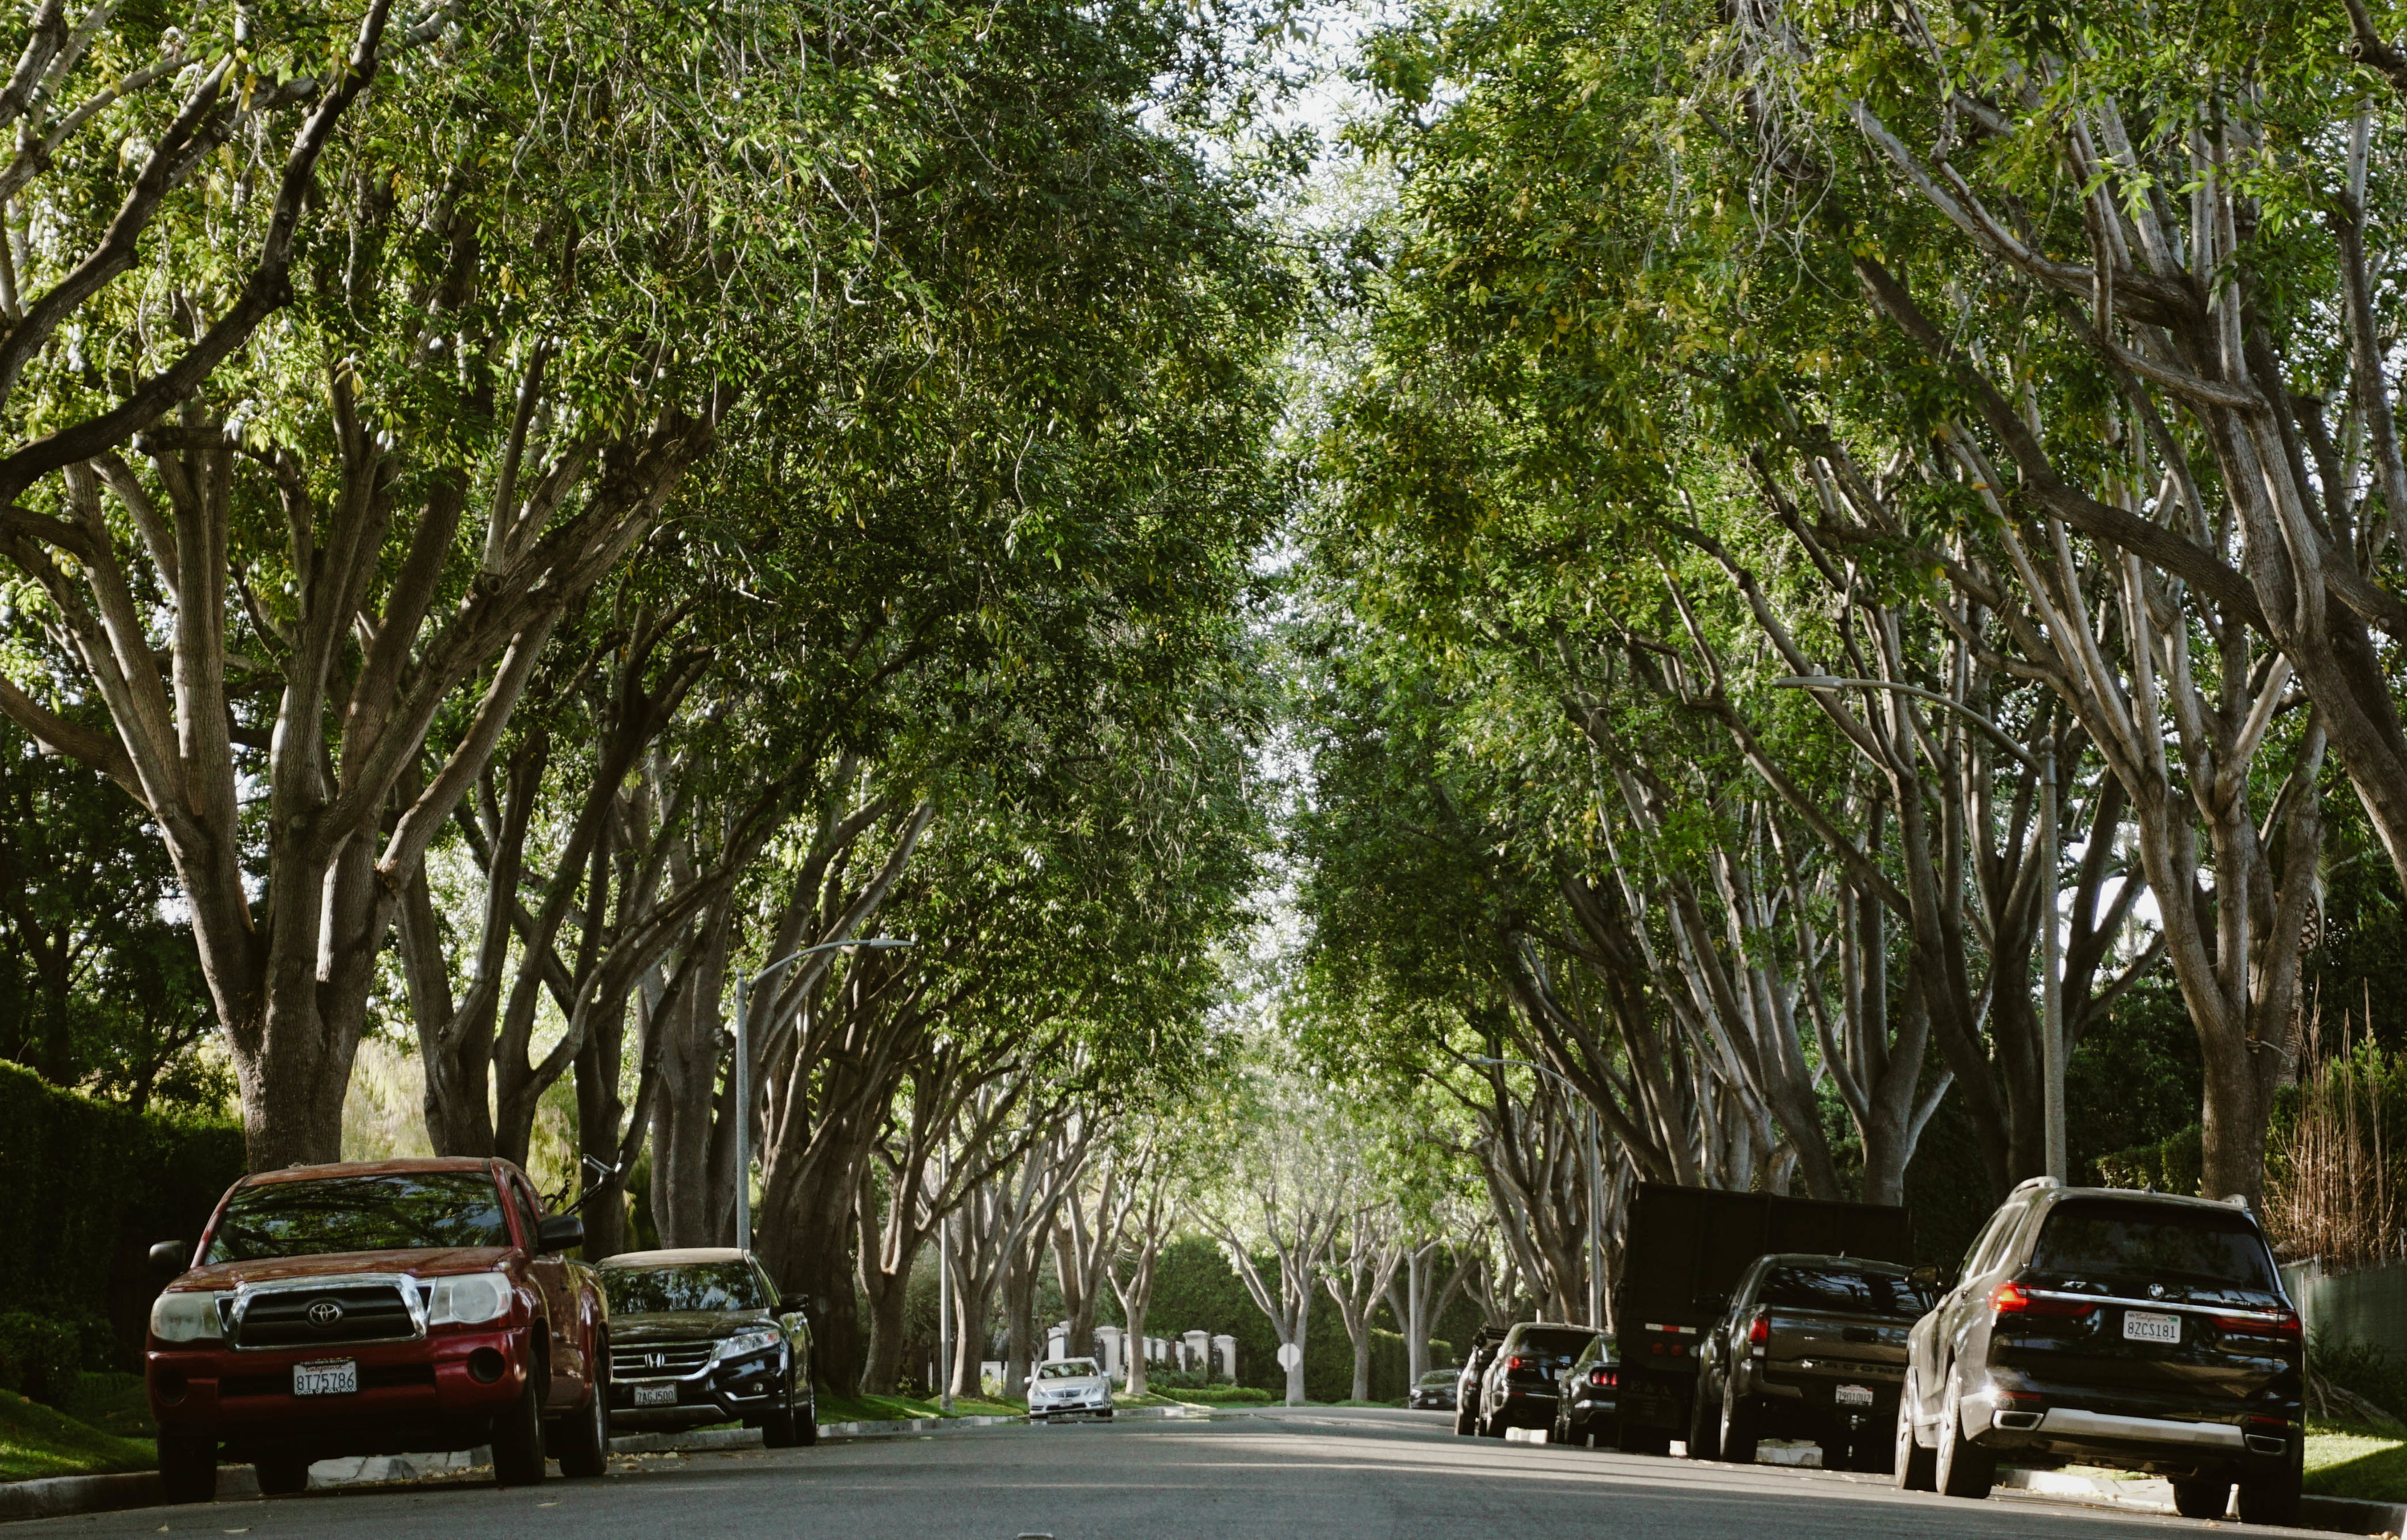 Sycamore trees lining a residential street